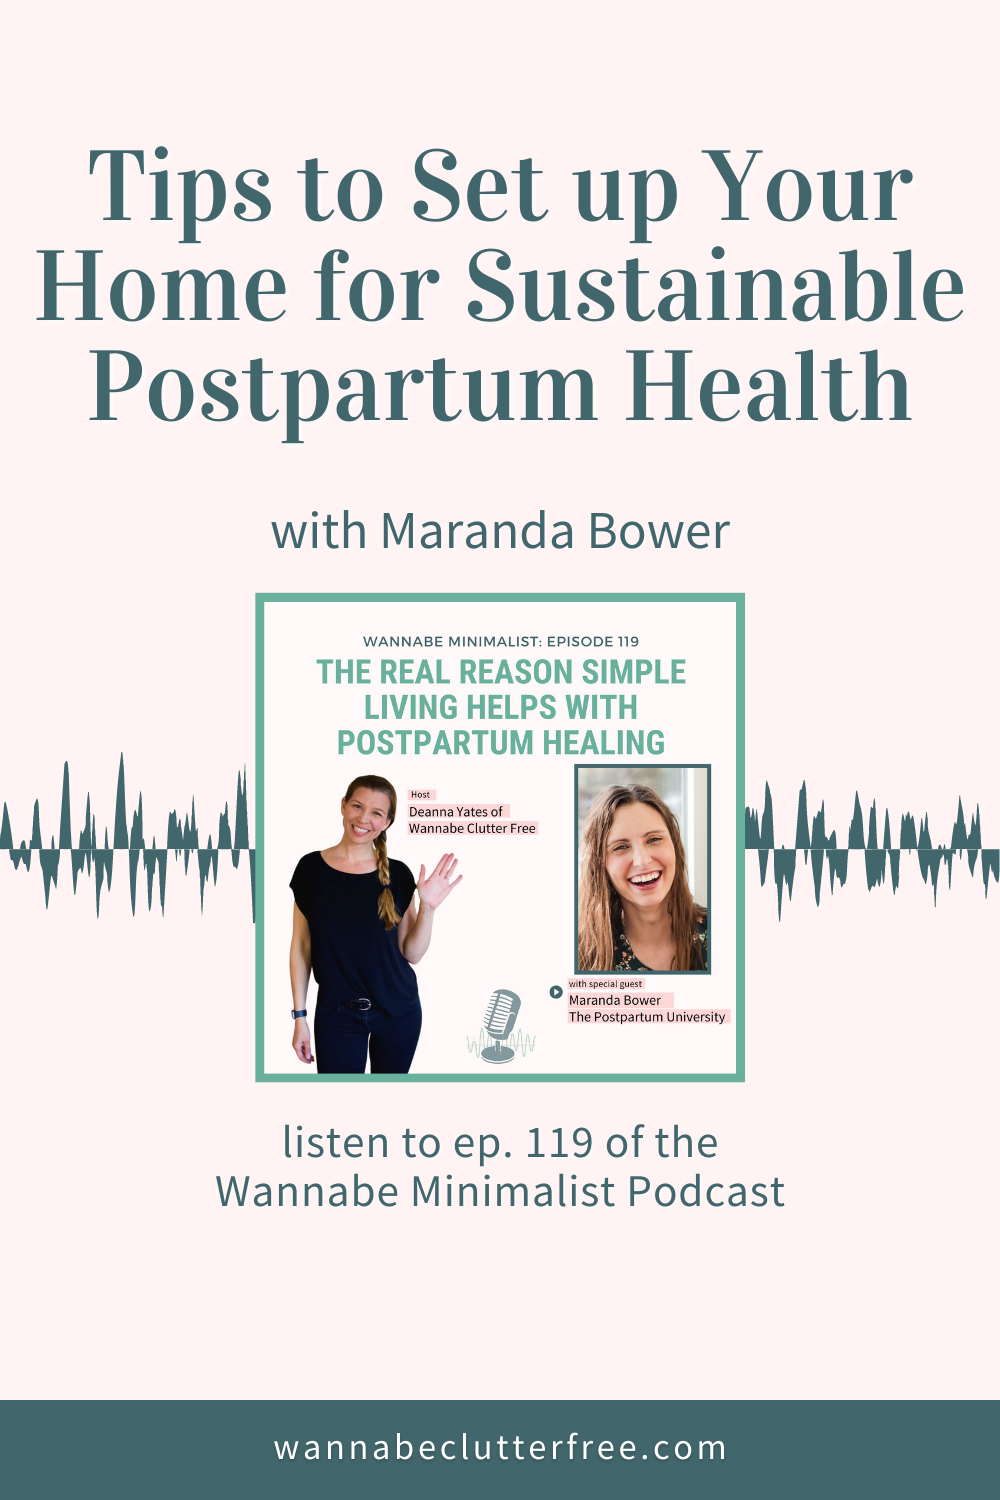 Tips to Set up Your Home for Sustainable Postpartum Health